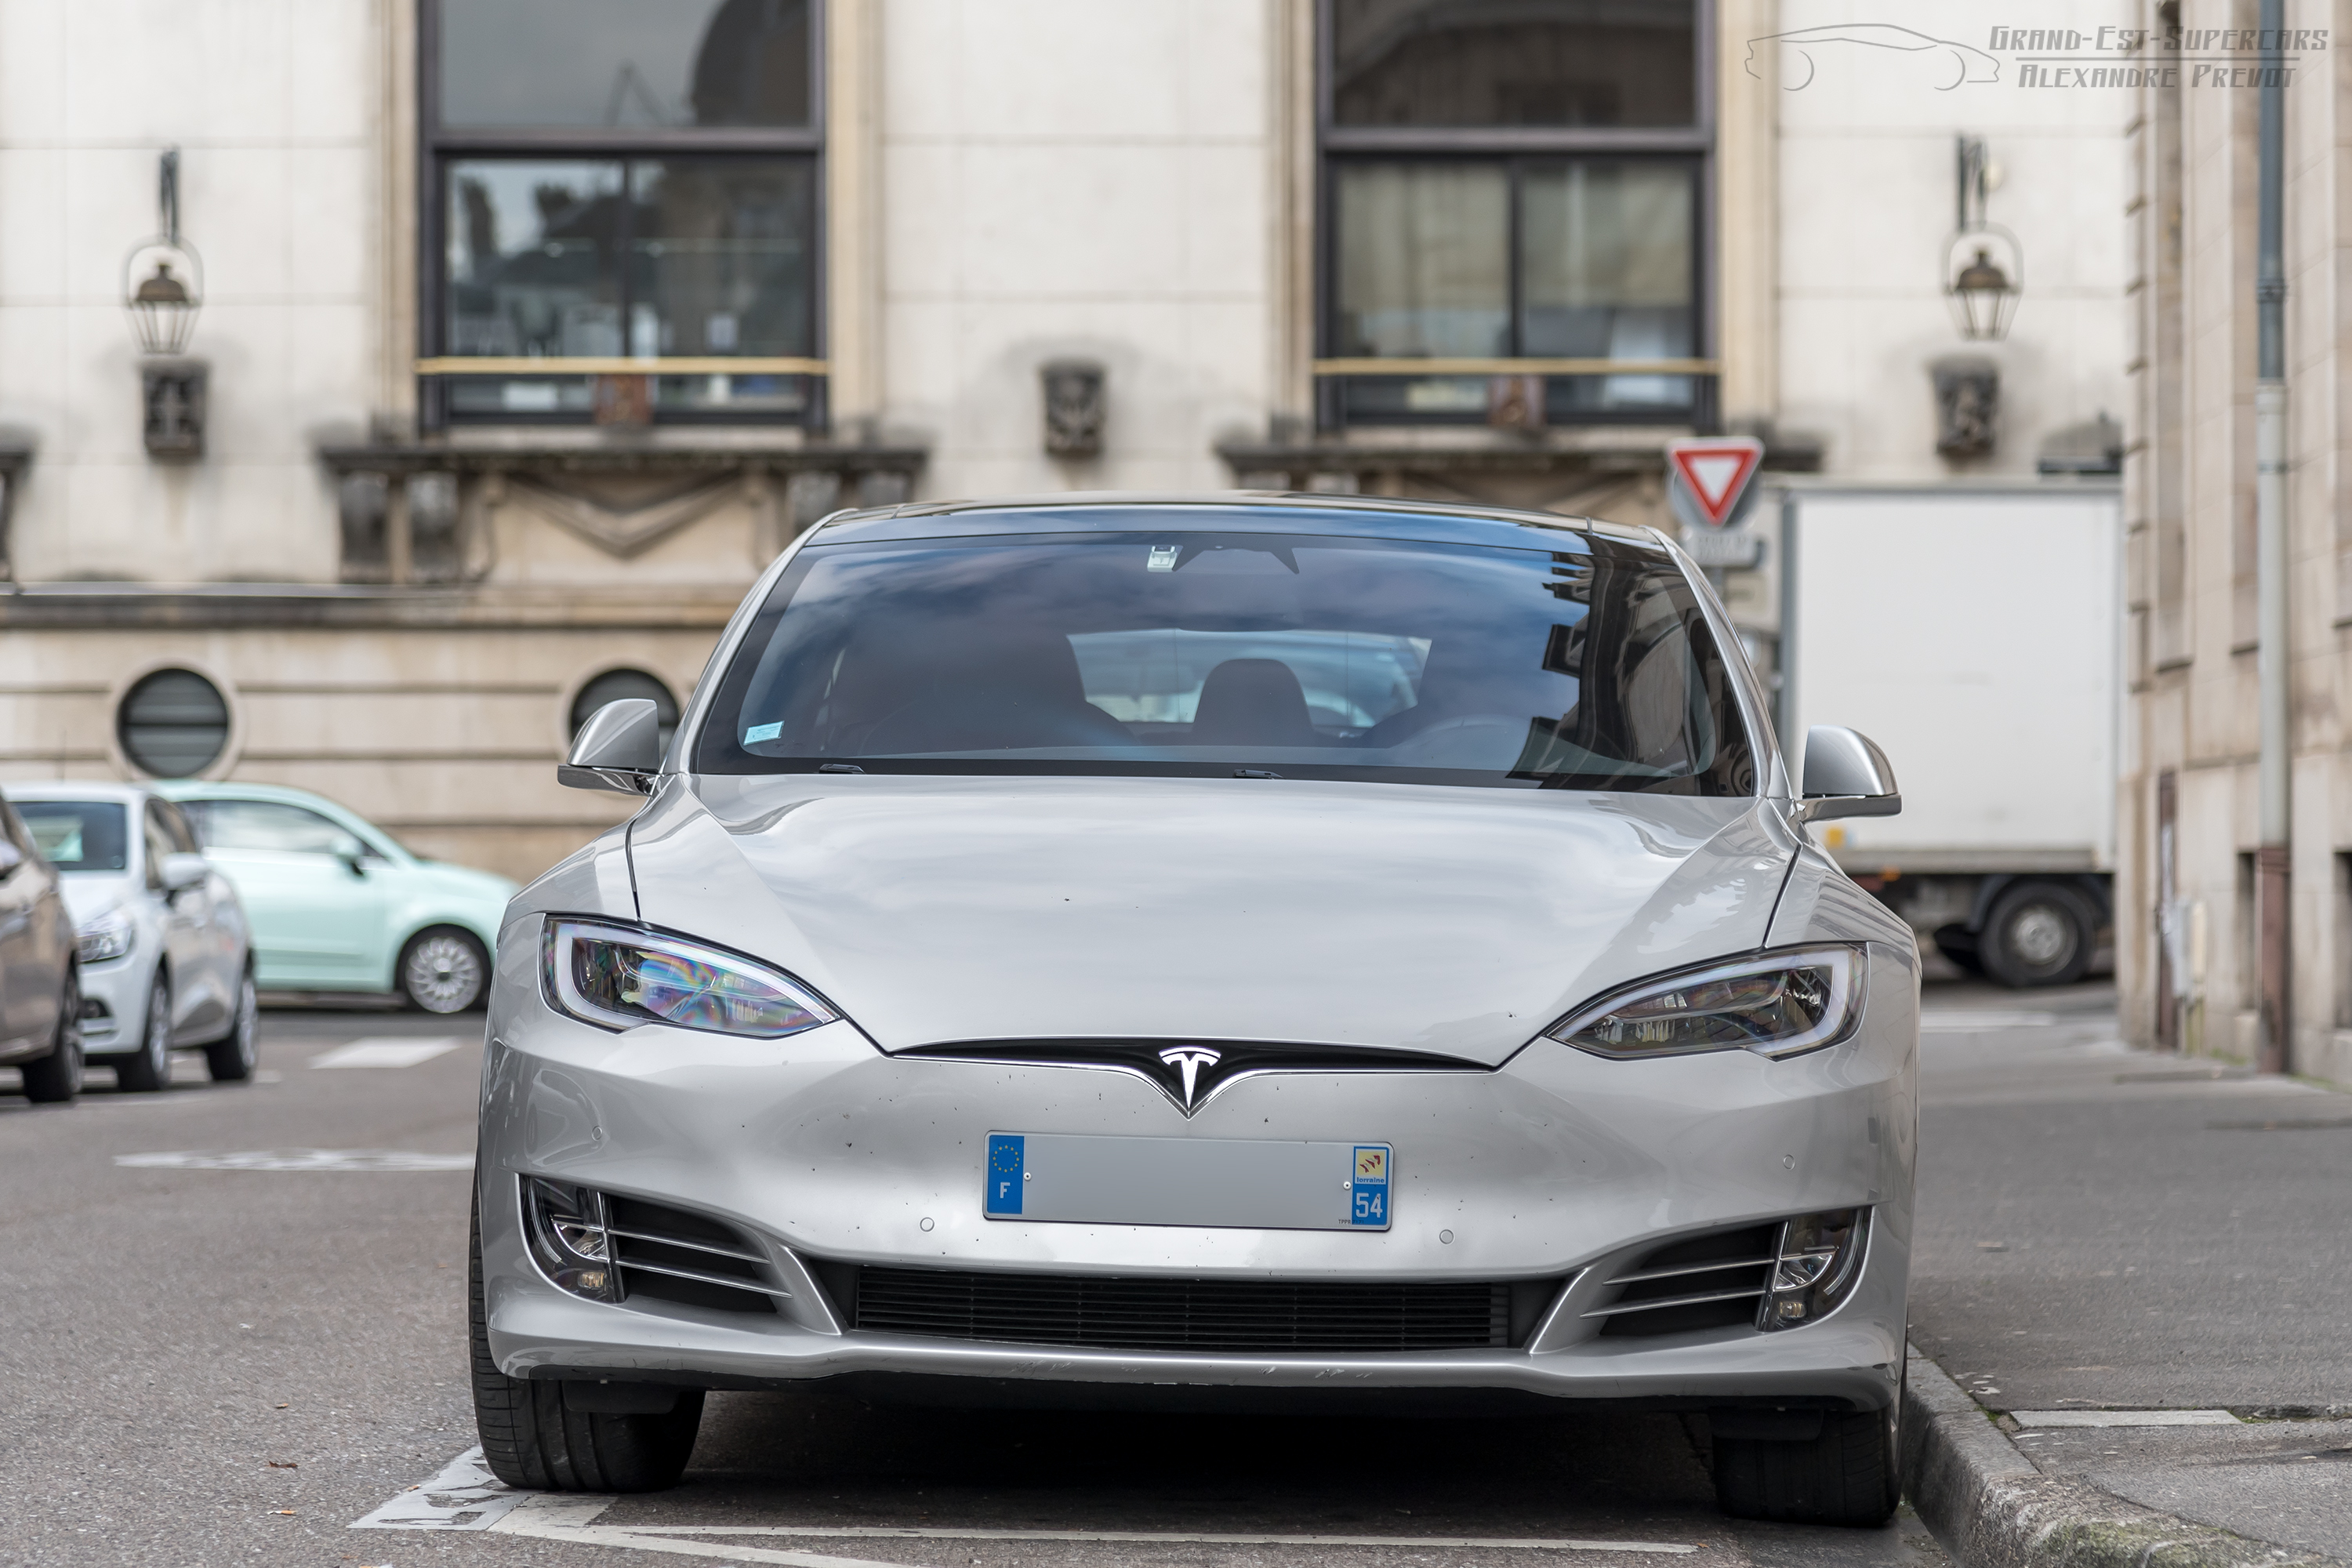 Tesla Model S How New Car Reaches 370 Miles Range With Same